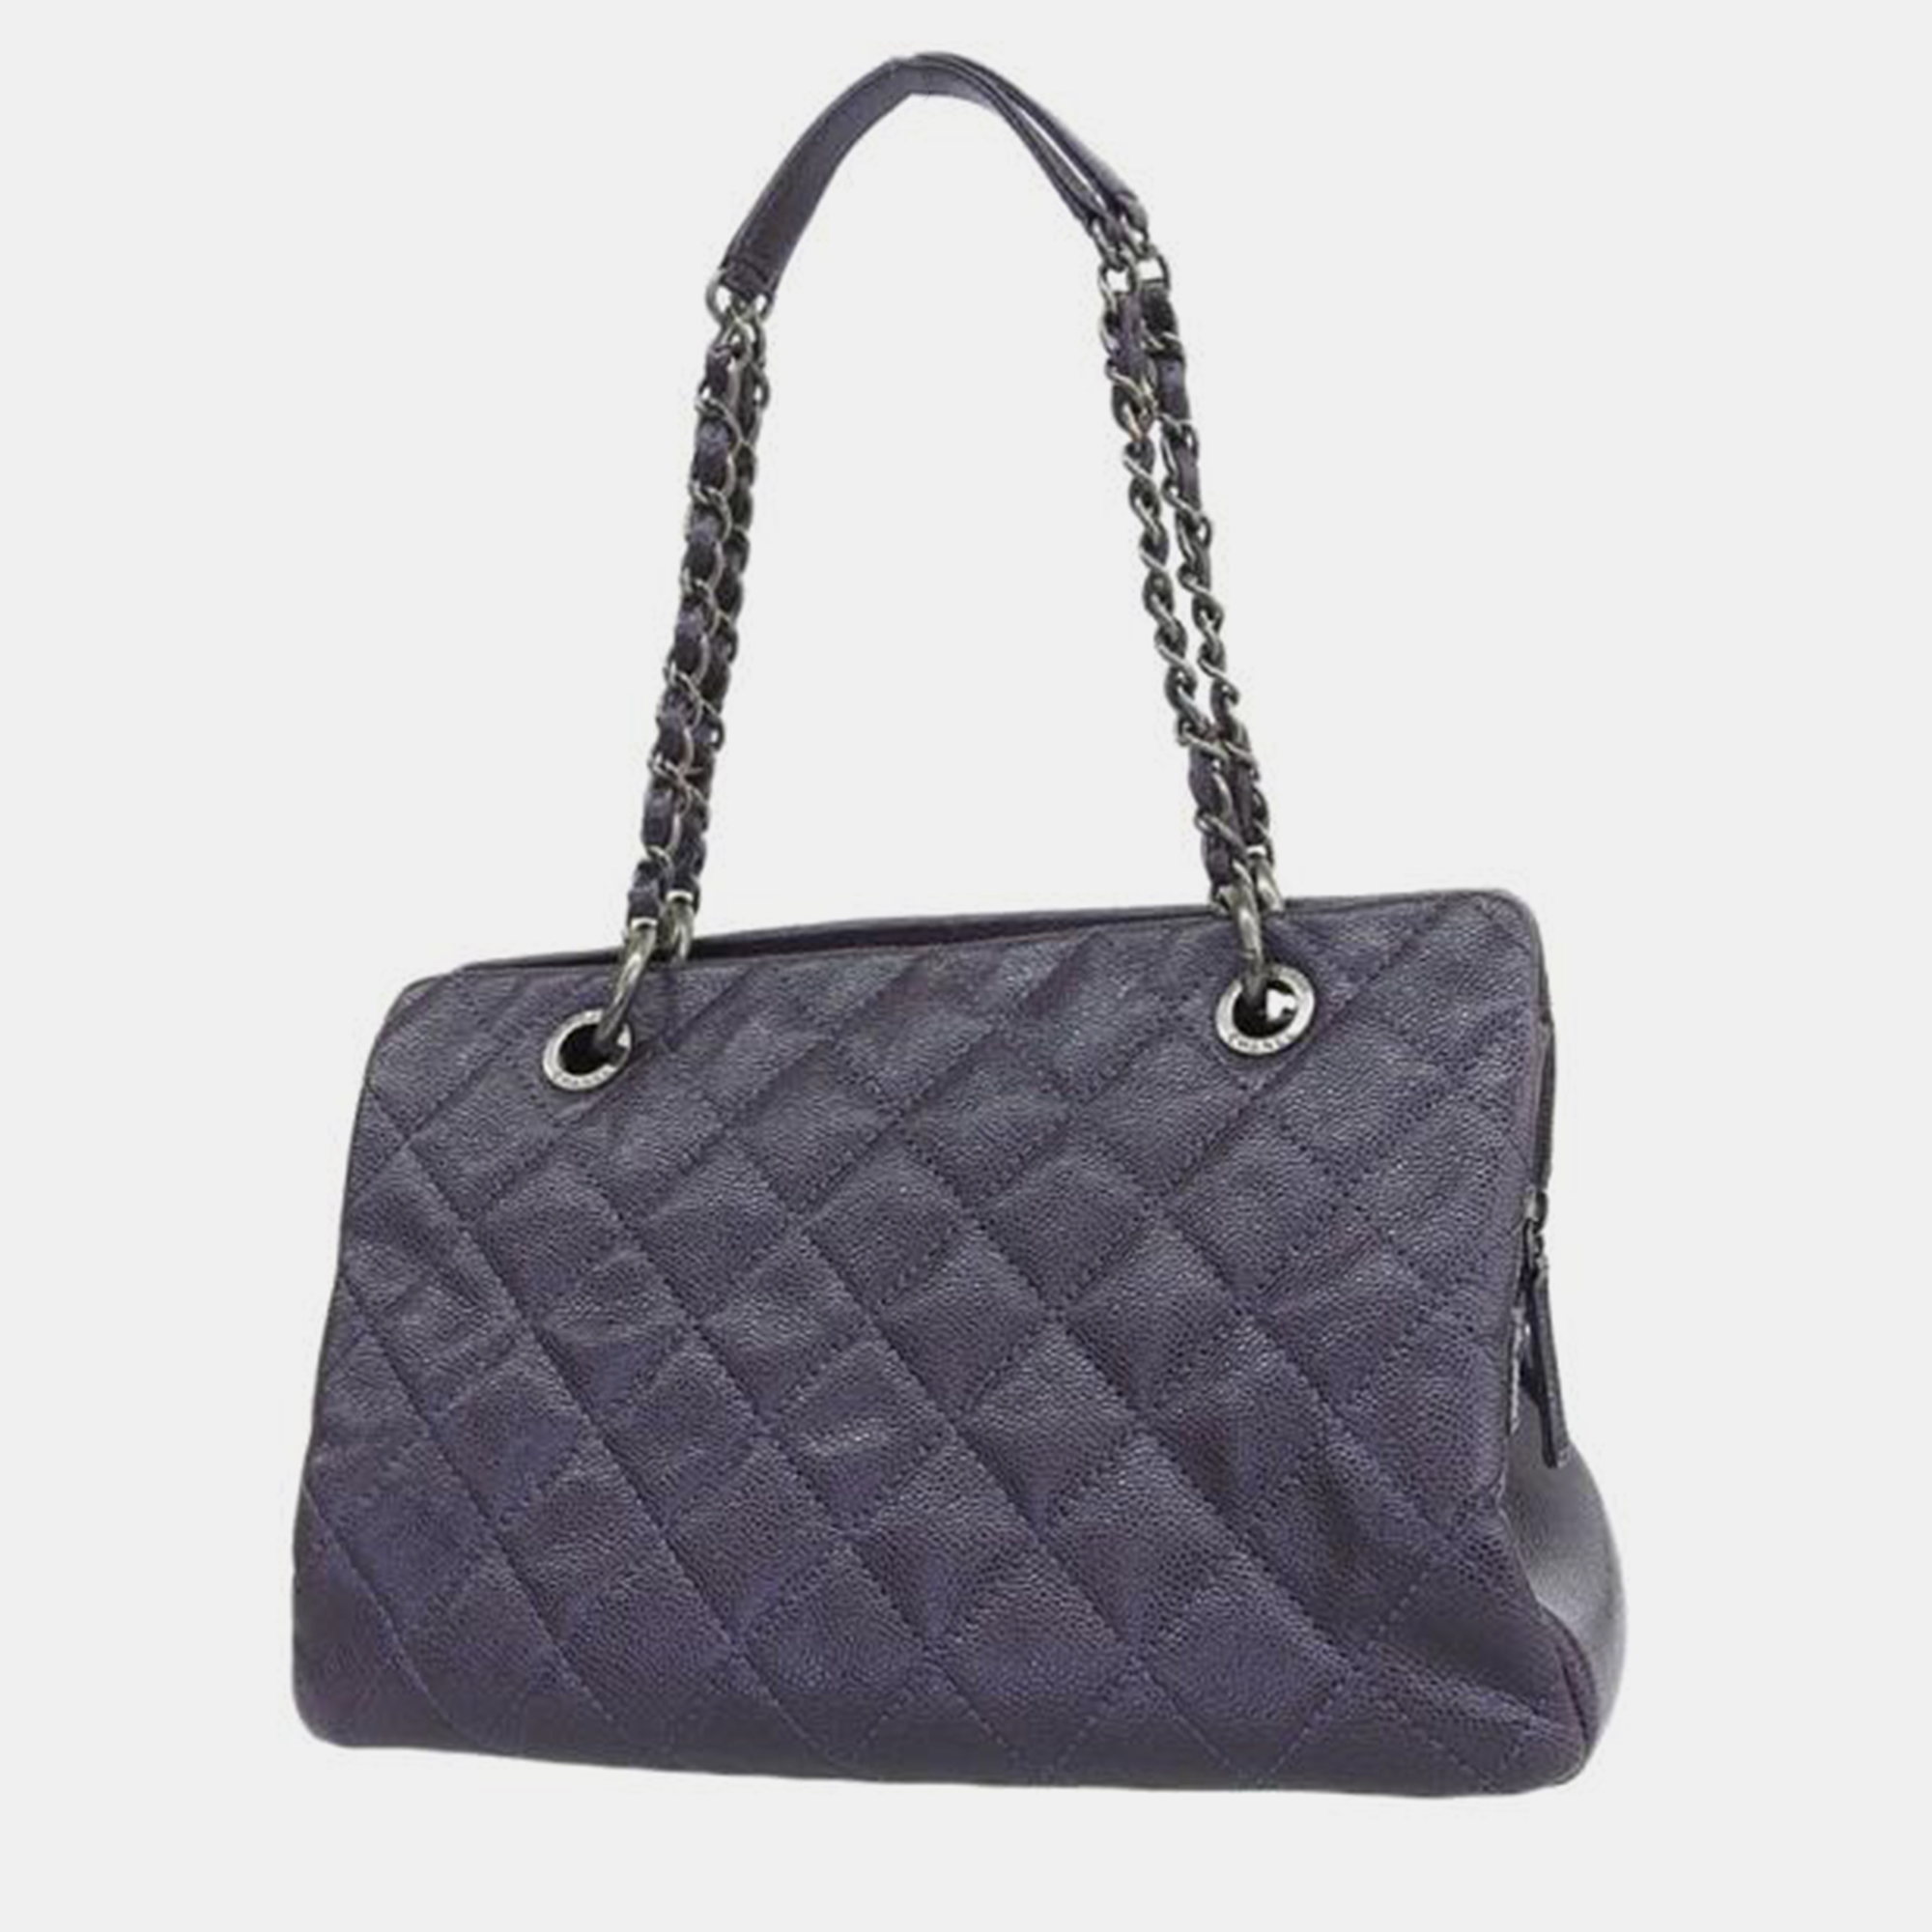 Elevate your style with an exquisite Chanel tote. This timeless masterpiece is crafted from high grade materials adorned with the iconic Dior motifs and features meticulous craftsmanship for luxury and sophistication.